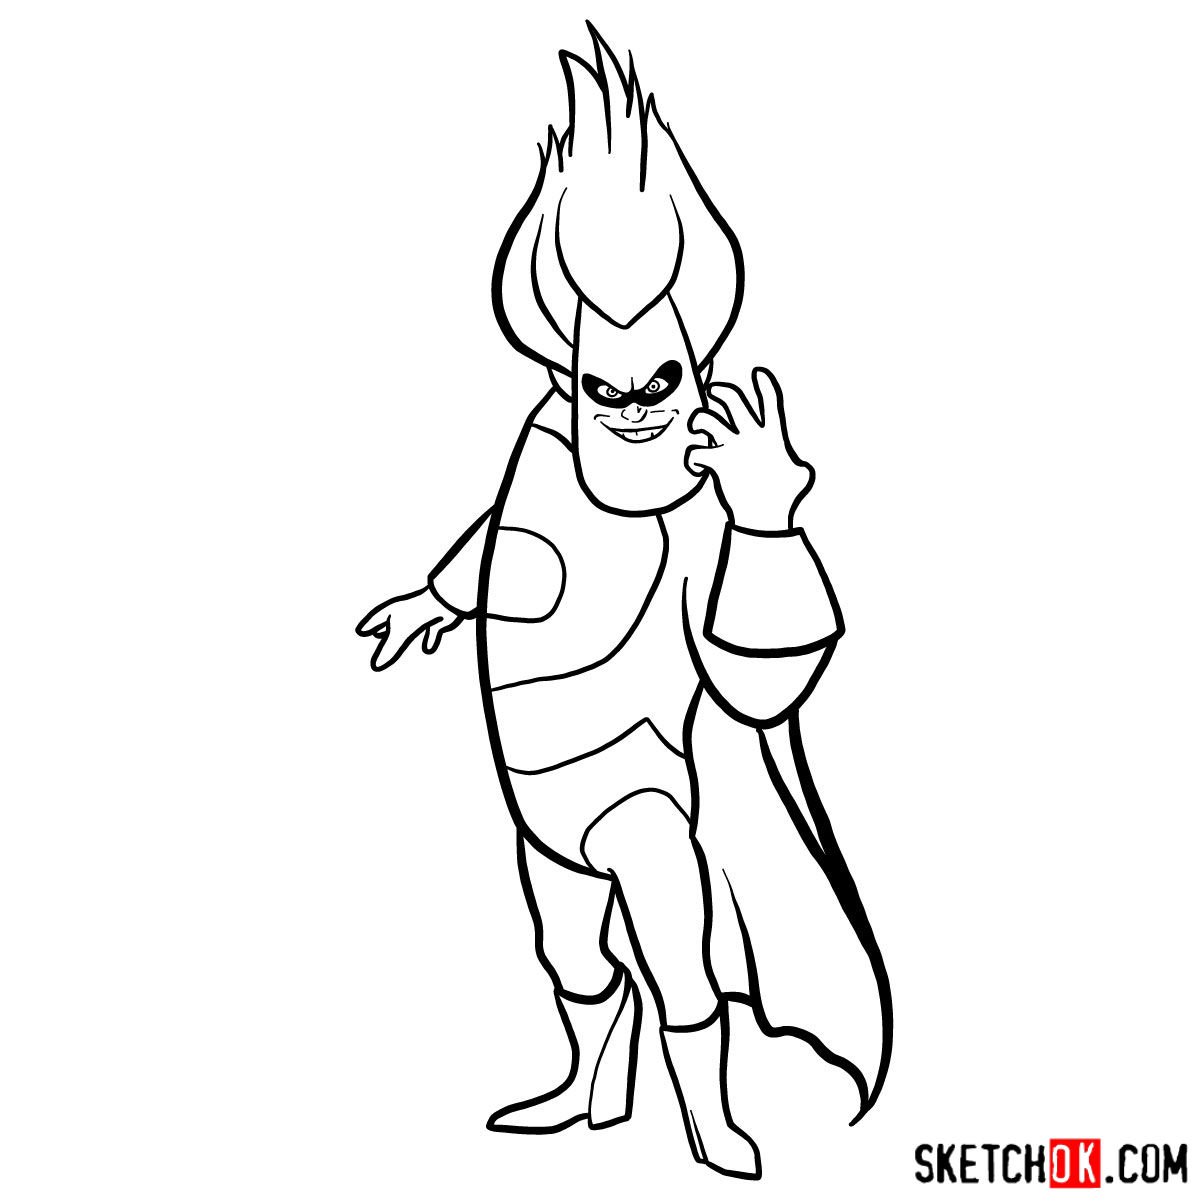 How to draw Buddy Pine (Syndrome) from The Incredibles - step 13